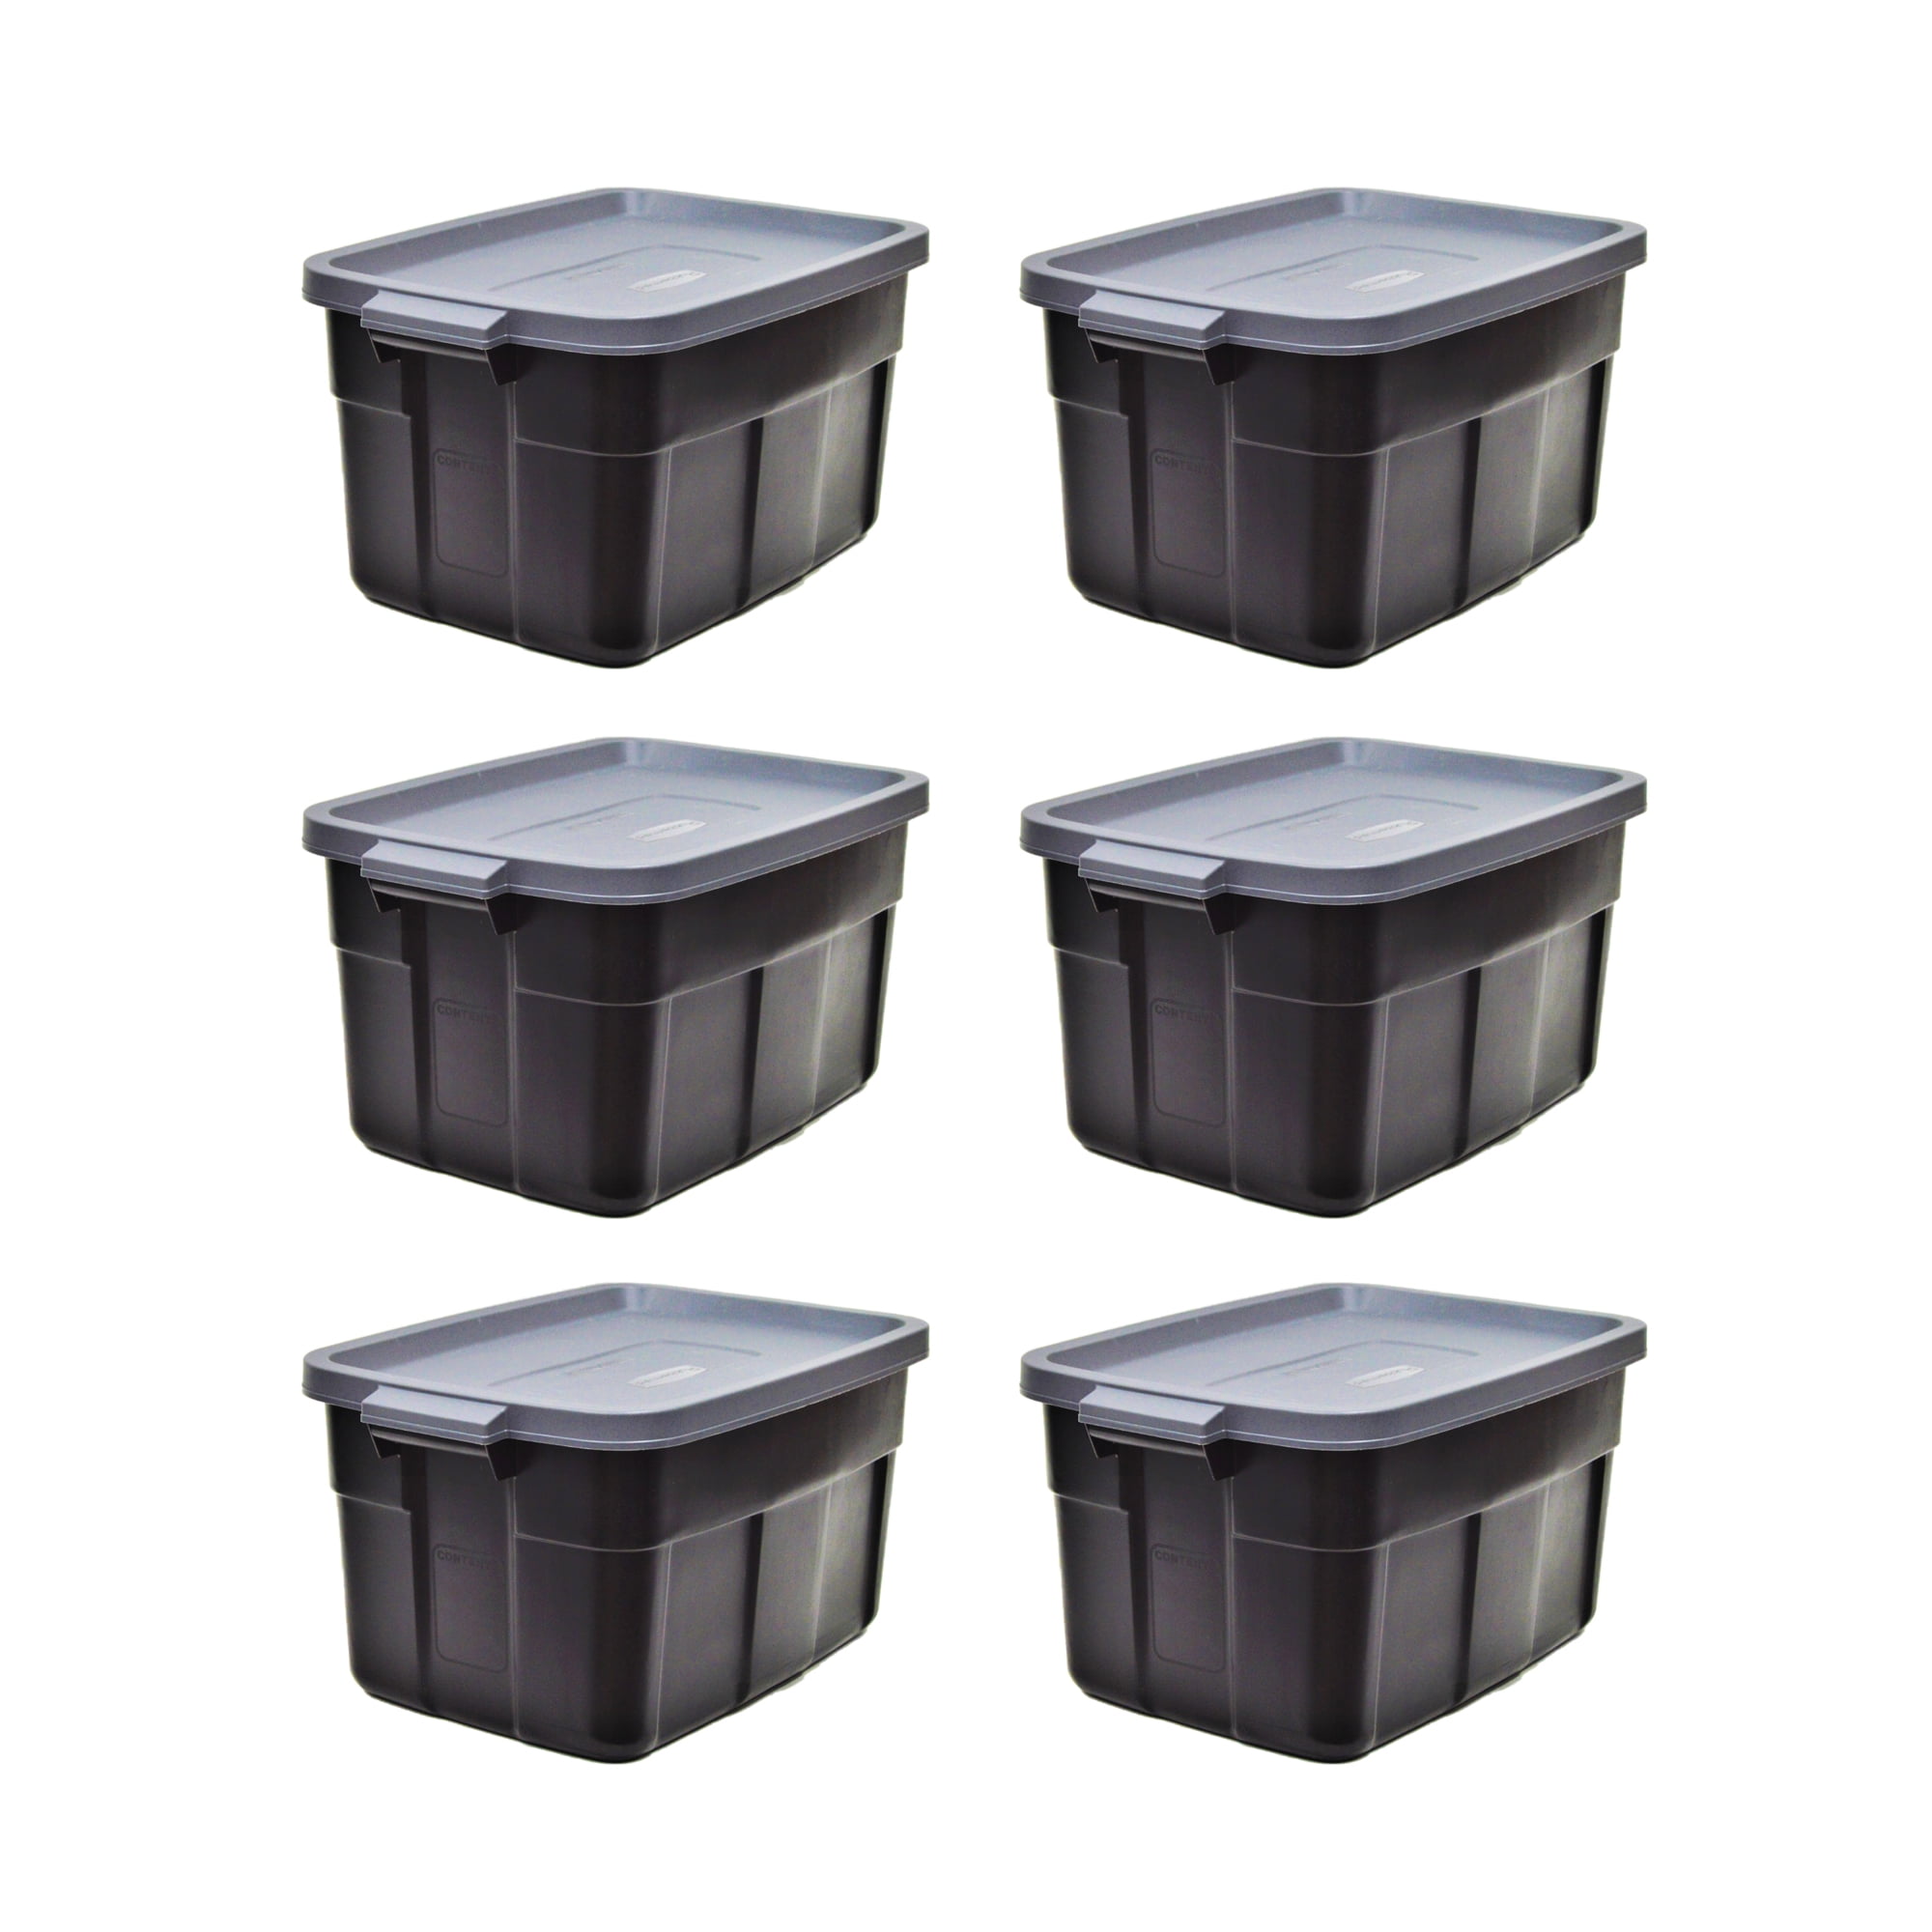 Rubbermaid Commercial Brute 14 Gal. Gray Storage Tote with Lid - Hevenor  Lumber Co.